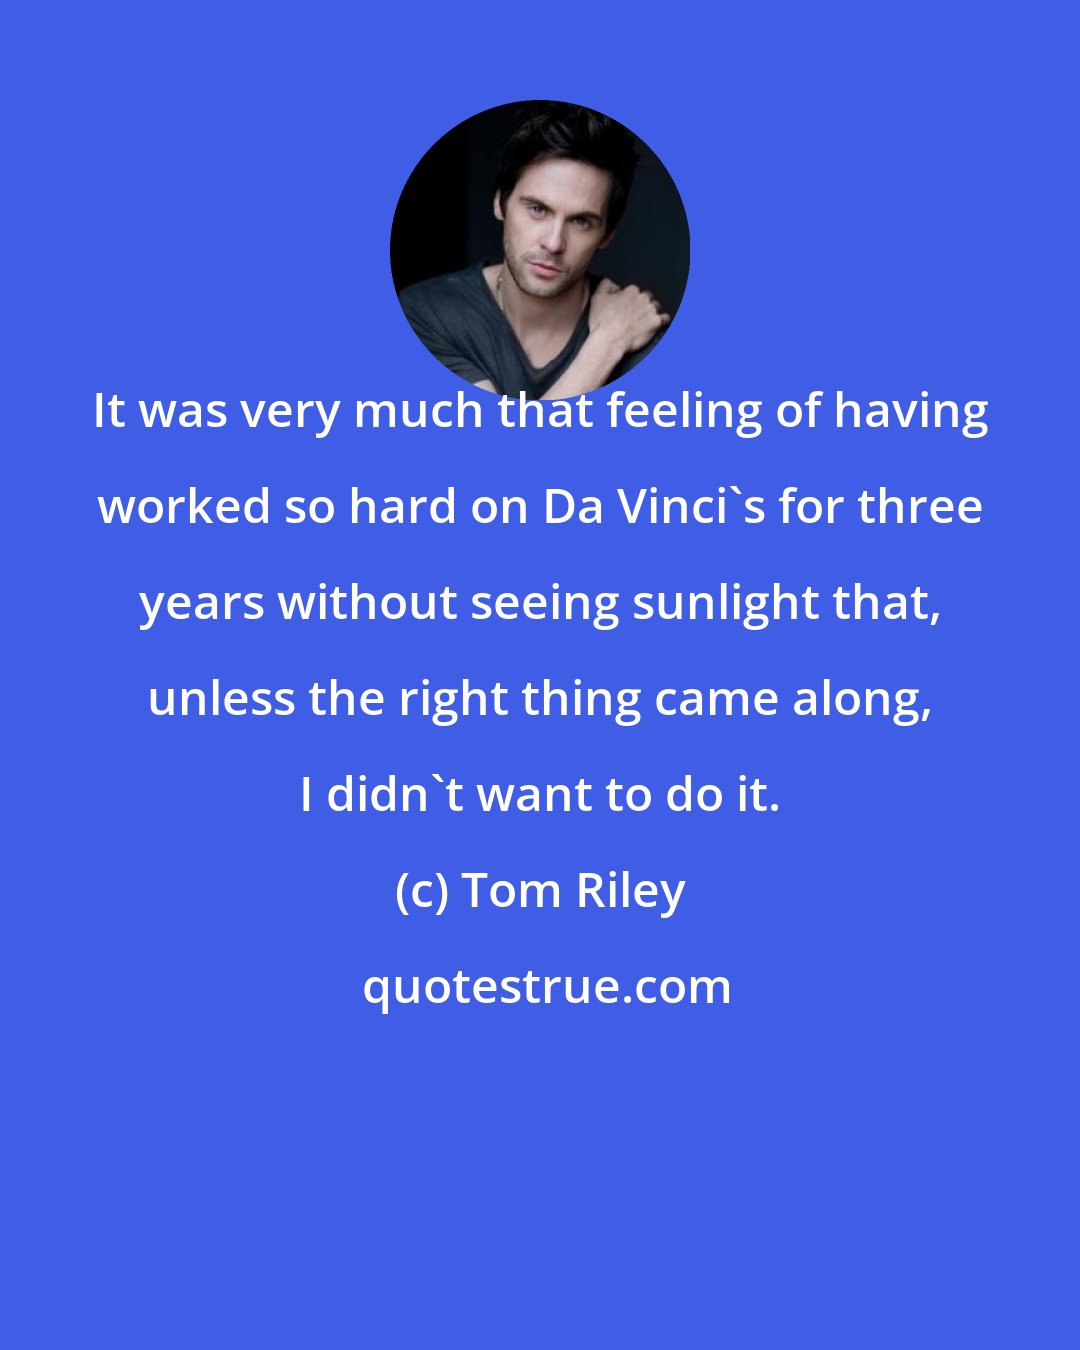 Tom Riley: It was very much that feeling of having worked so hard on Da Vinci's for three years without seeing sunlight that, unless the right thing came along, I didn't want to do it.